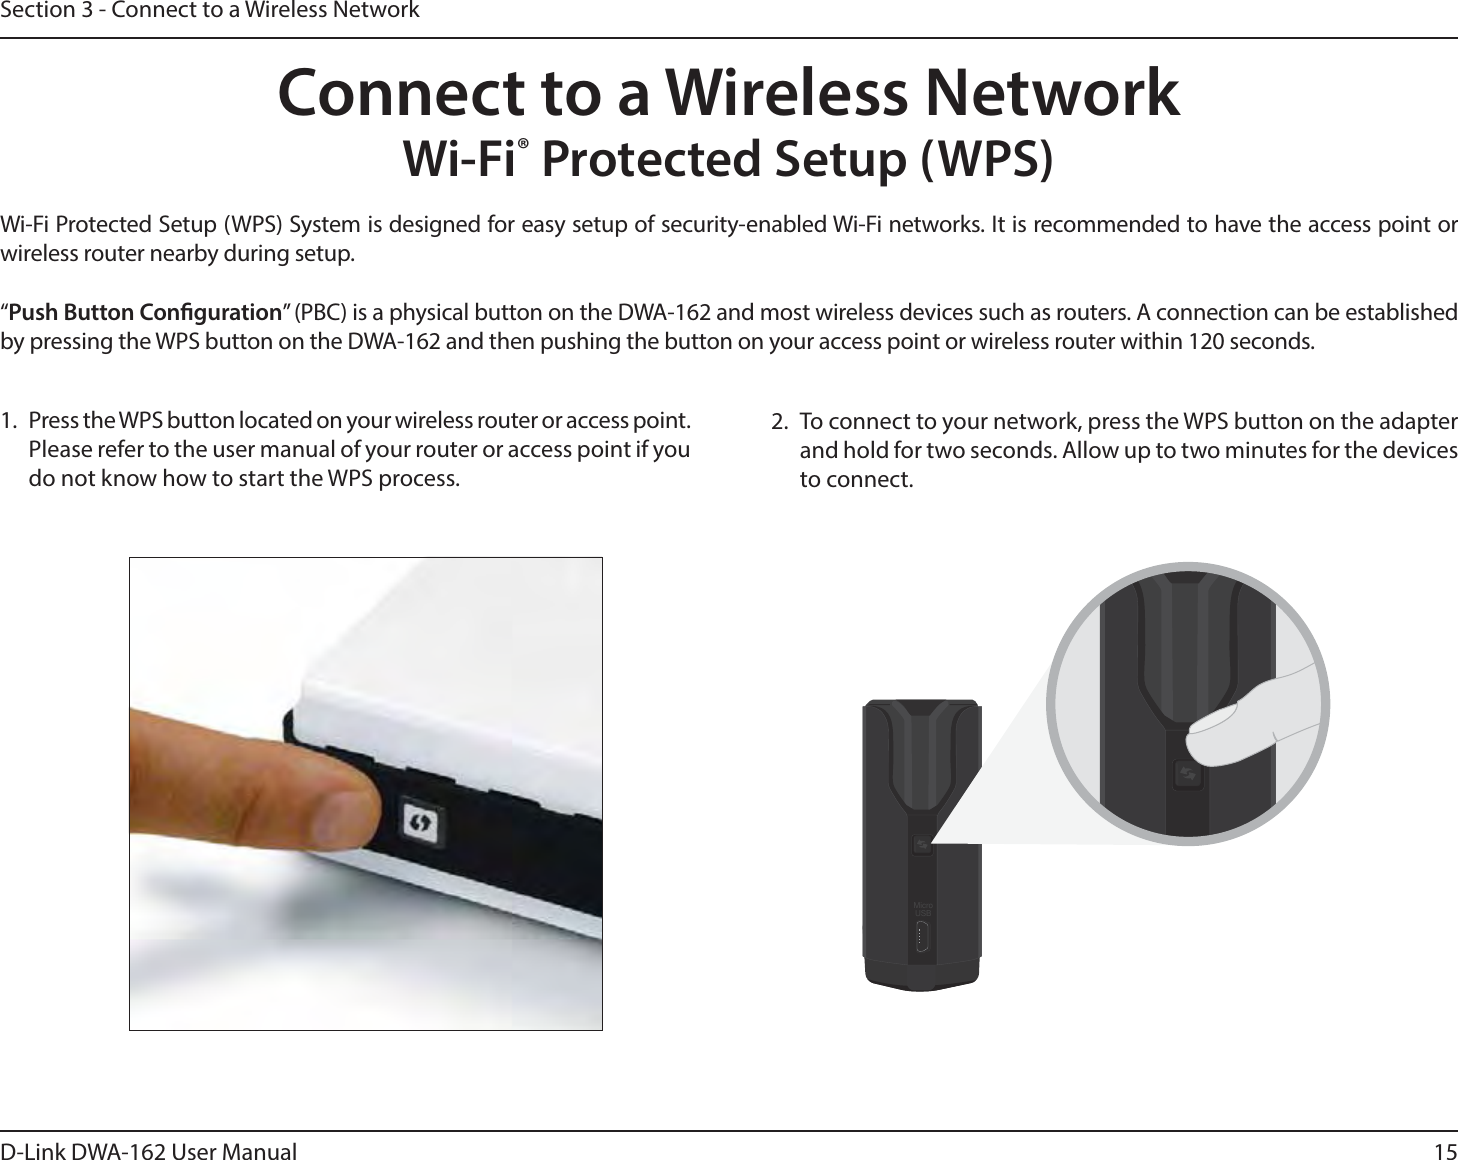 15D-Link DWA-162 User ManualSection 3 - Connect to a Wireless NetworkWi-Fi® Protected Setup (WPS)Wi-Fi Protected Setup (WPS) System is designed for easy setup of security-enabled Wi-Fi networks. It is recommended to have the access point or wireless router nearby during setup. “Push Button Conguration” (PBC) is a physical button on the DWA-162 and most wireless devices such as routers. A connection can be established by pressing the WPS button on the DWA-162 and then pushing the button on your access point or wireless router within 120 seconds. Connect to a Wireless Network2.  To connect to your network, press the WPS button on the adapter and hold for two seconds. Allow up to two minutes for the devices to connect.MicroUSB1.  Press the WPS button located on your wireless router or access point. Please refer to the user manual of your router or access point if you do not know how to start the WPS process.